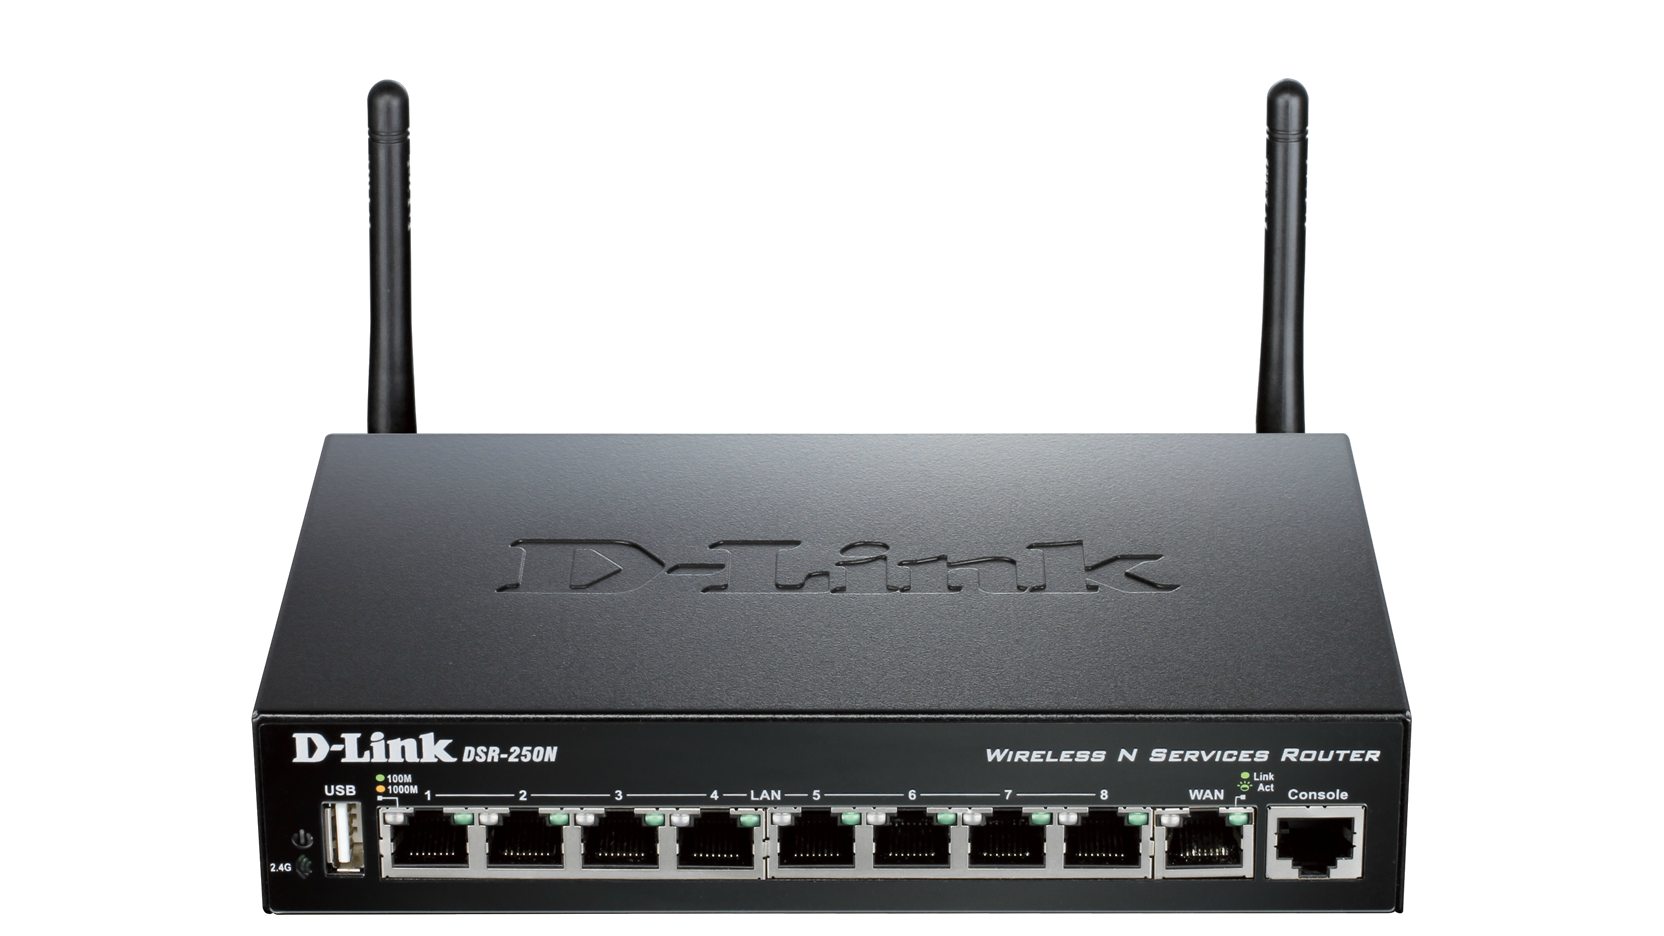 D-Link DSR-250N Unified Service Router